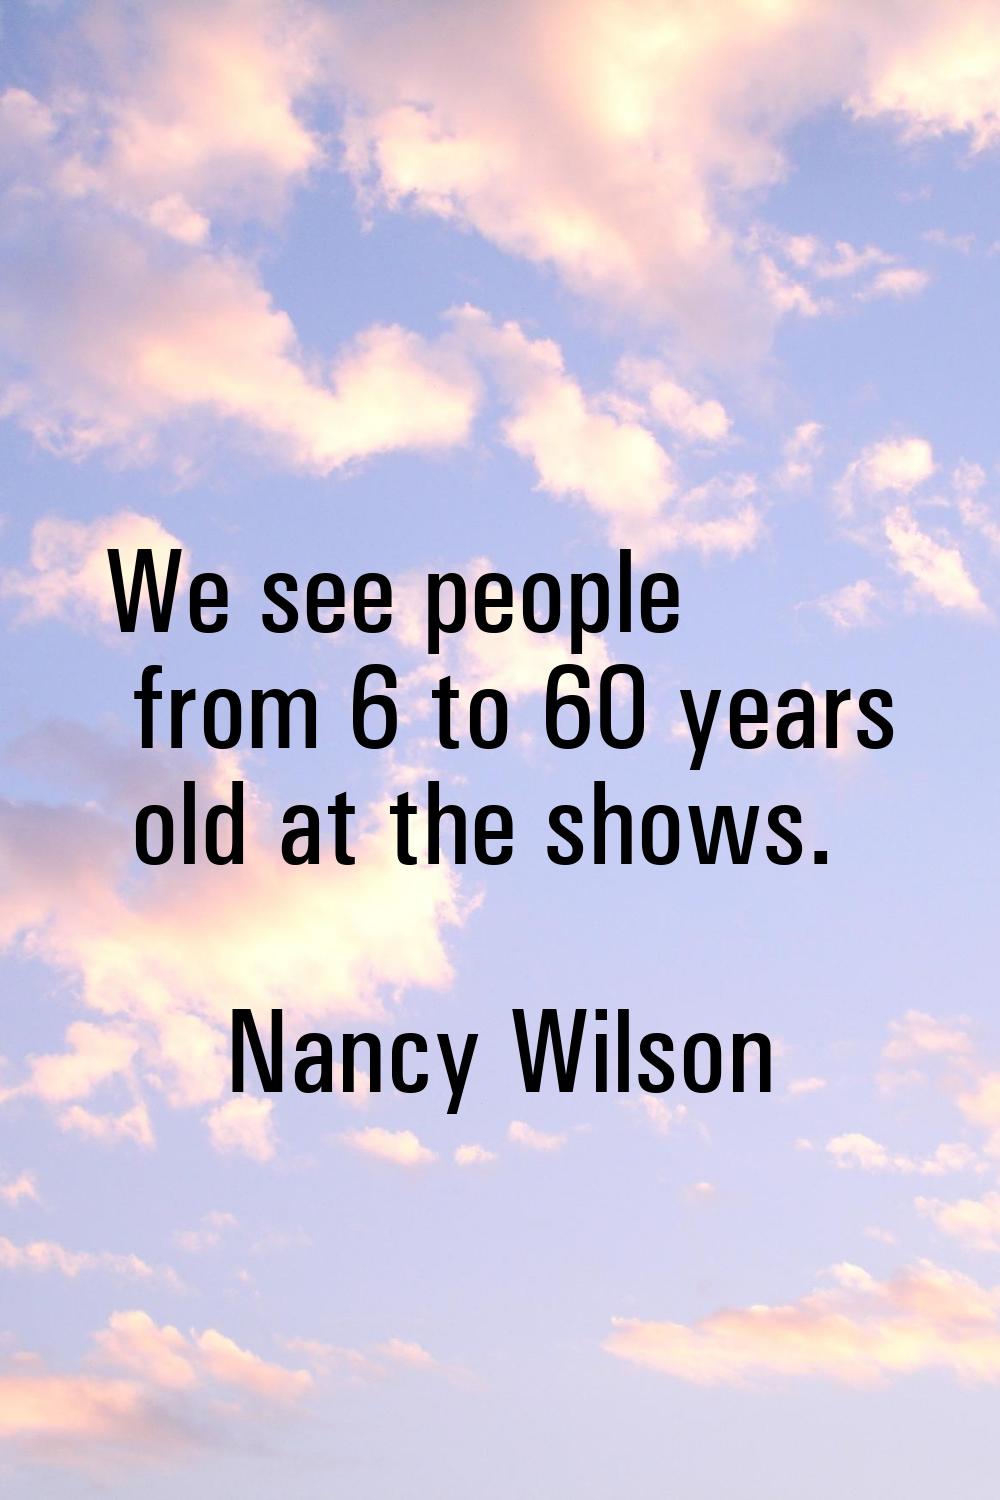 We see people from 6 to 60 years old at the shows.